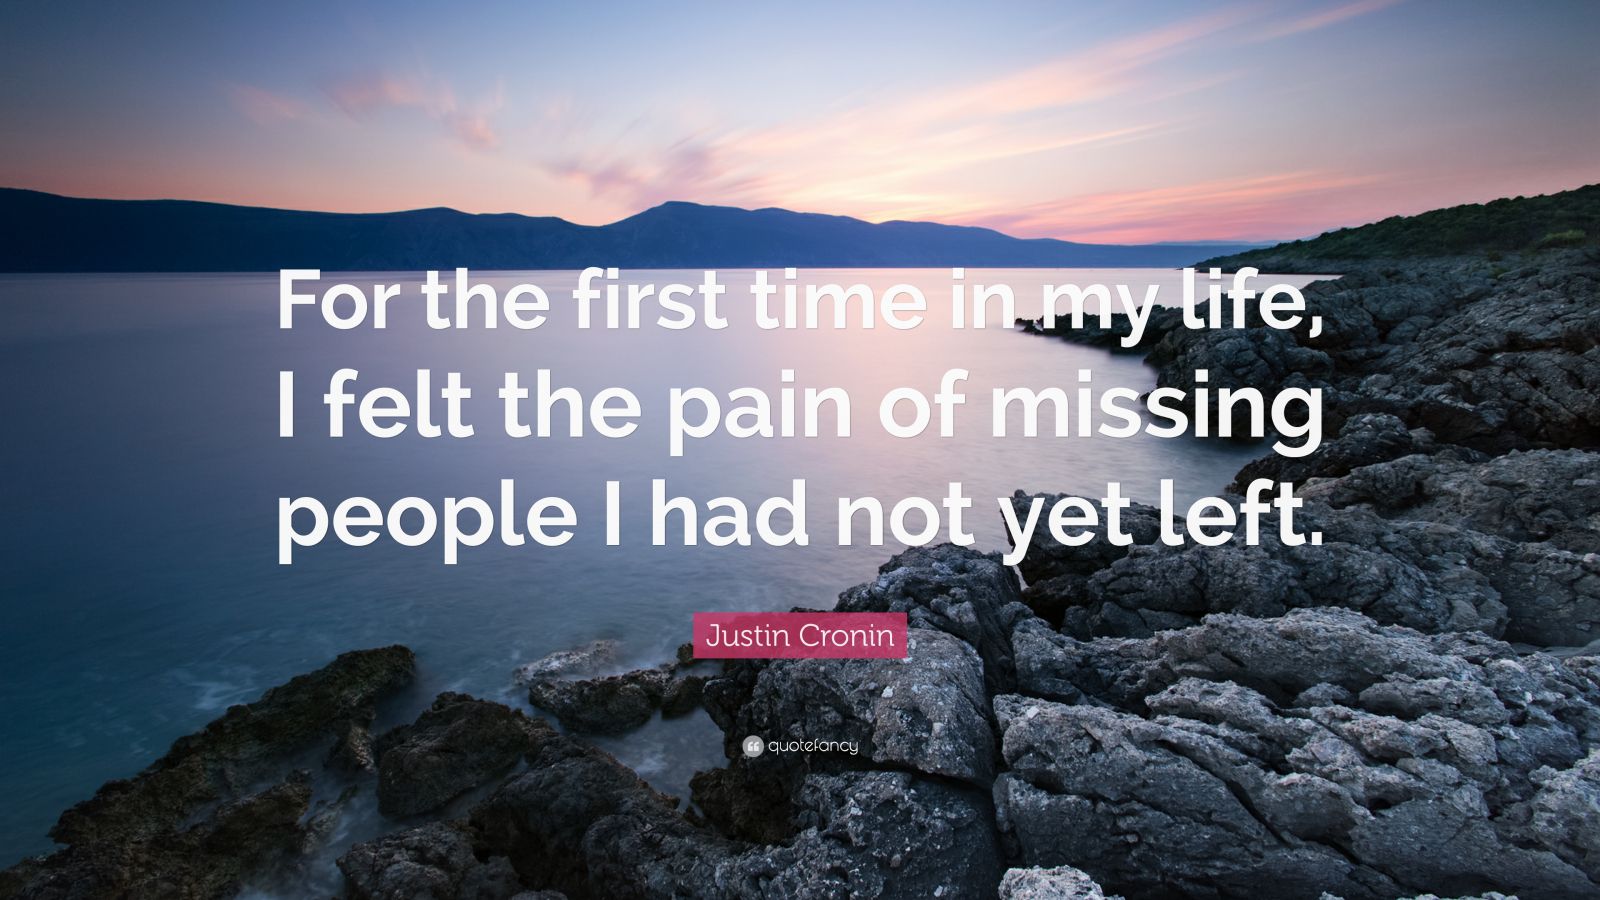 Justin Cronin Quote: “For the first time in my life, I felt the ...